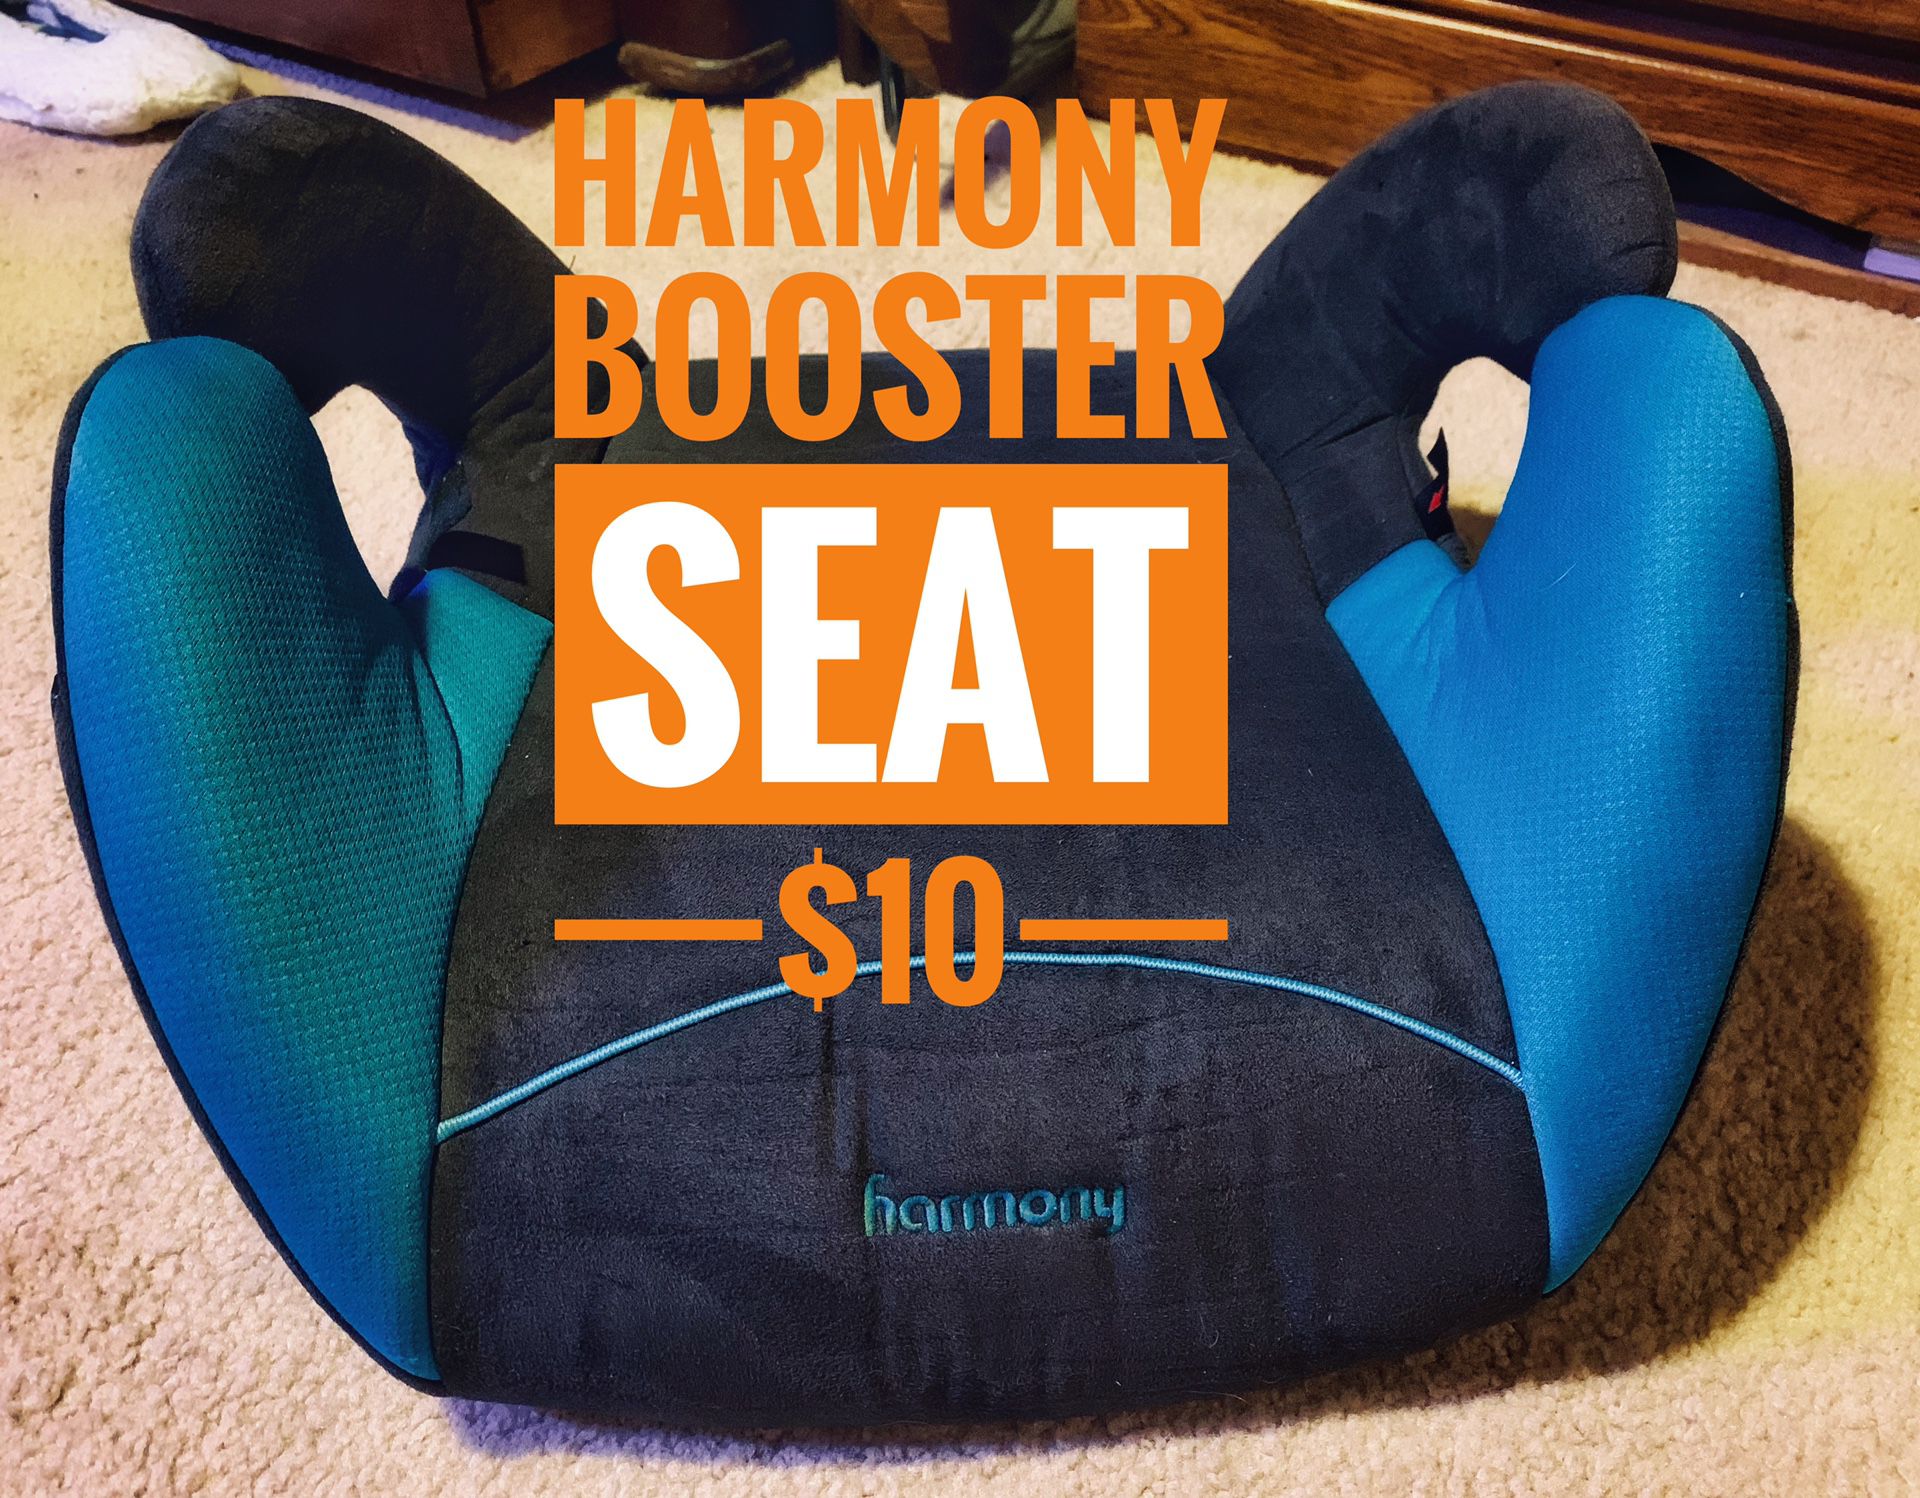 Harmony booster seat car seat - blue - clean - like new